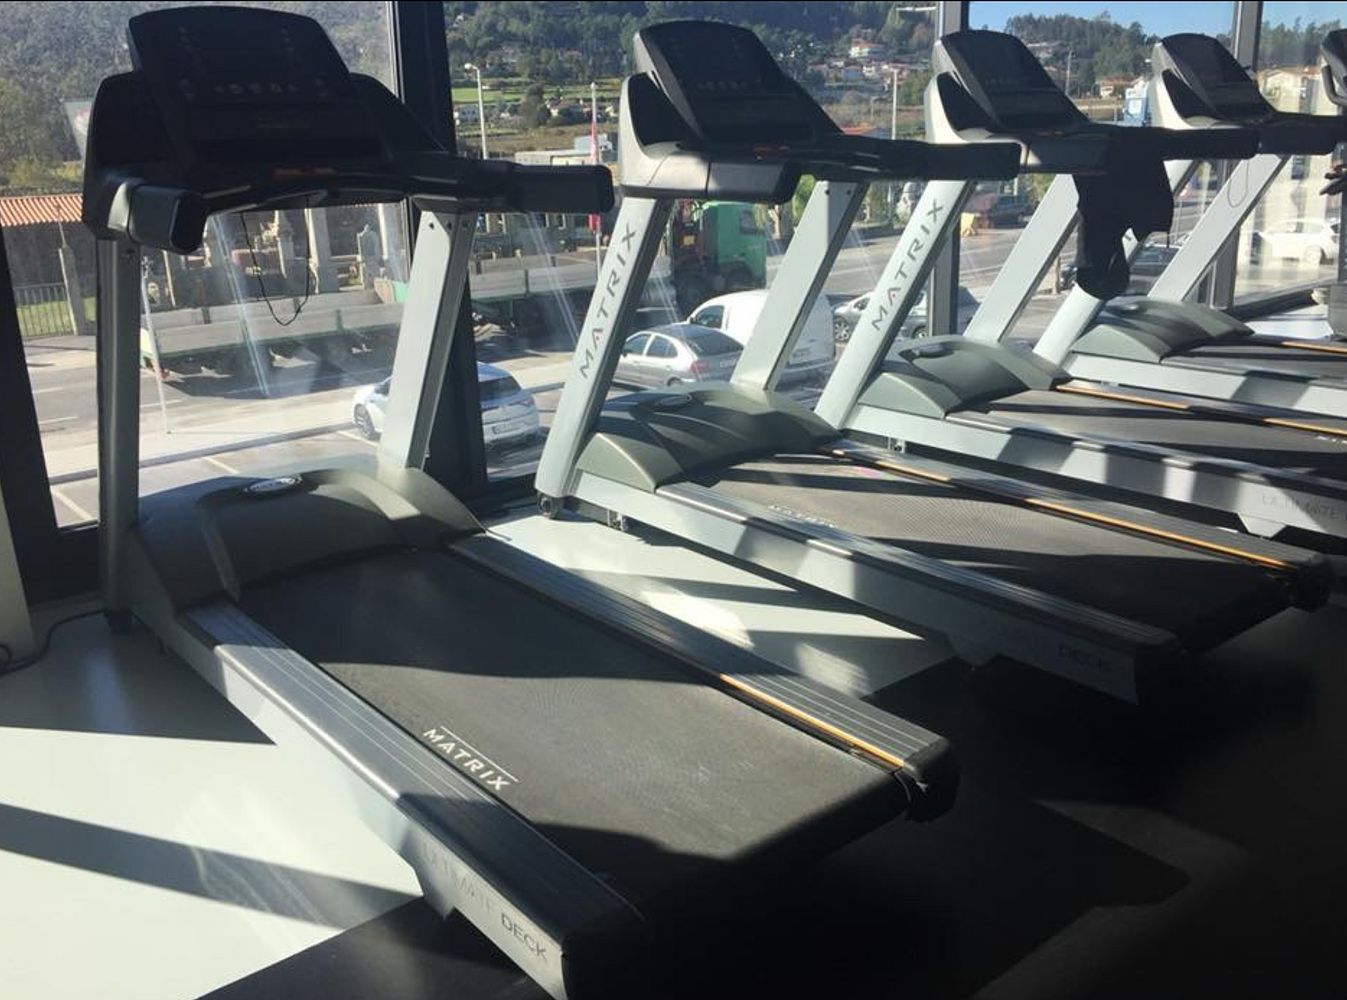 VO2 fitness gym in Barcelos, Portugal